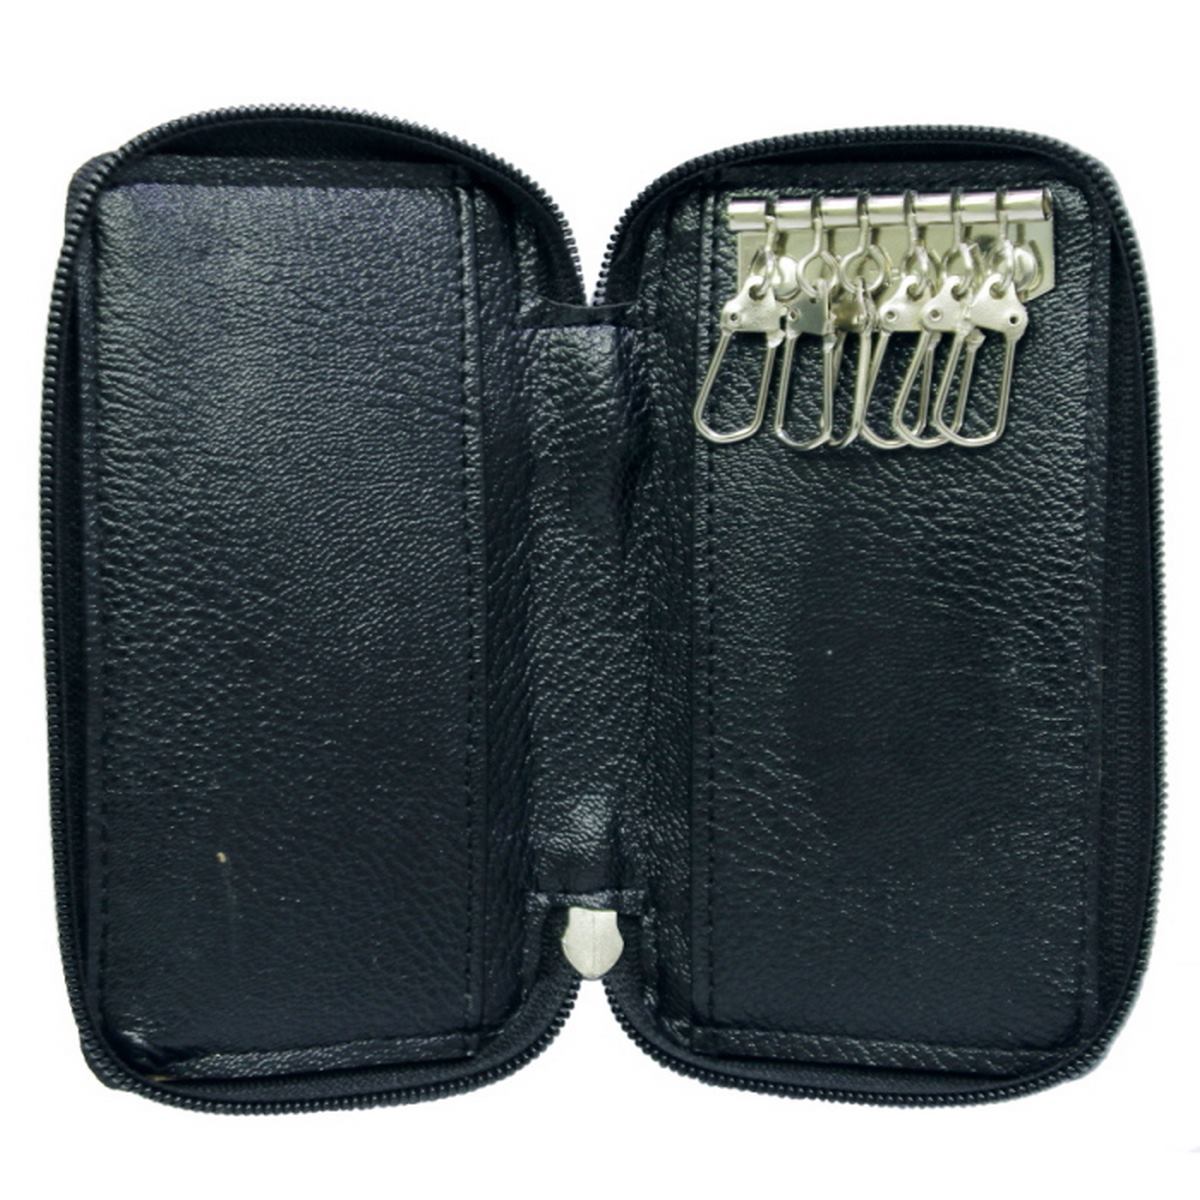 Black 5 Inch Key Holder Guard Case - For Office Use, Personal Use, Corporate Gifting, Return Gift - JAKGBK003